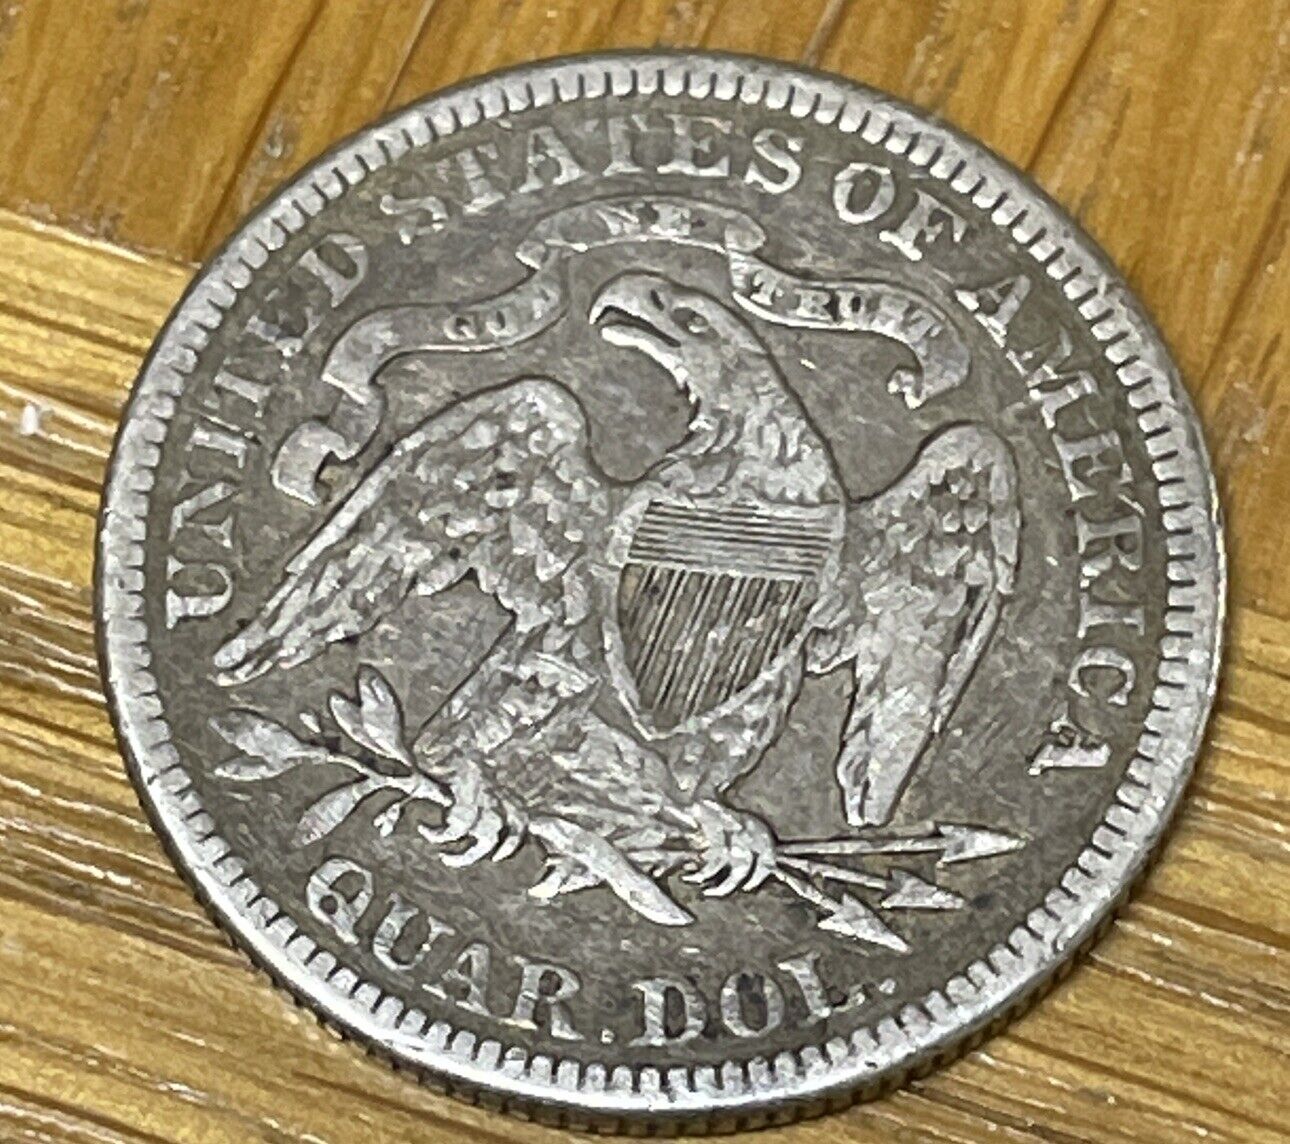 beautiful Type 5 1877 seated silver quarter VF to Extra Fine sharp features